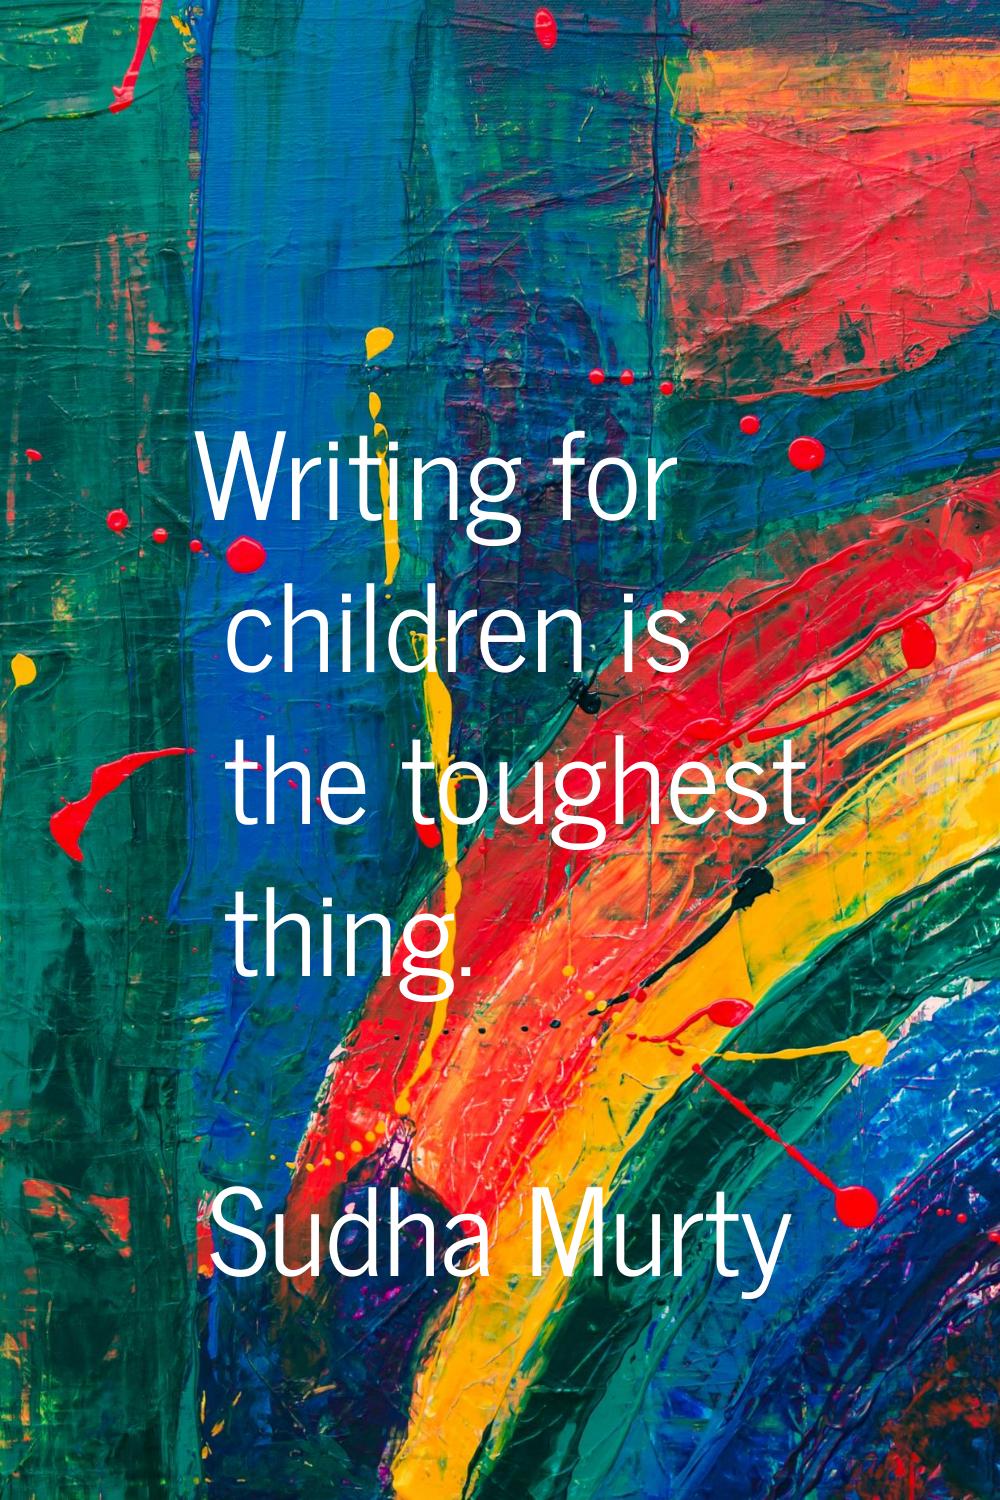 Writing for children is the toughest thing.